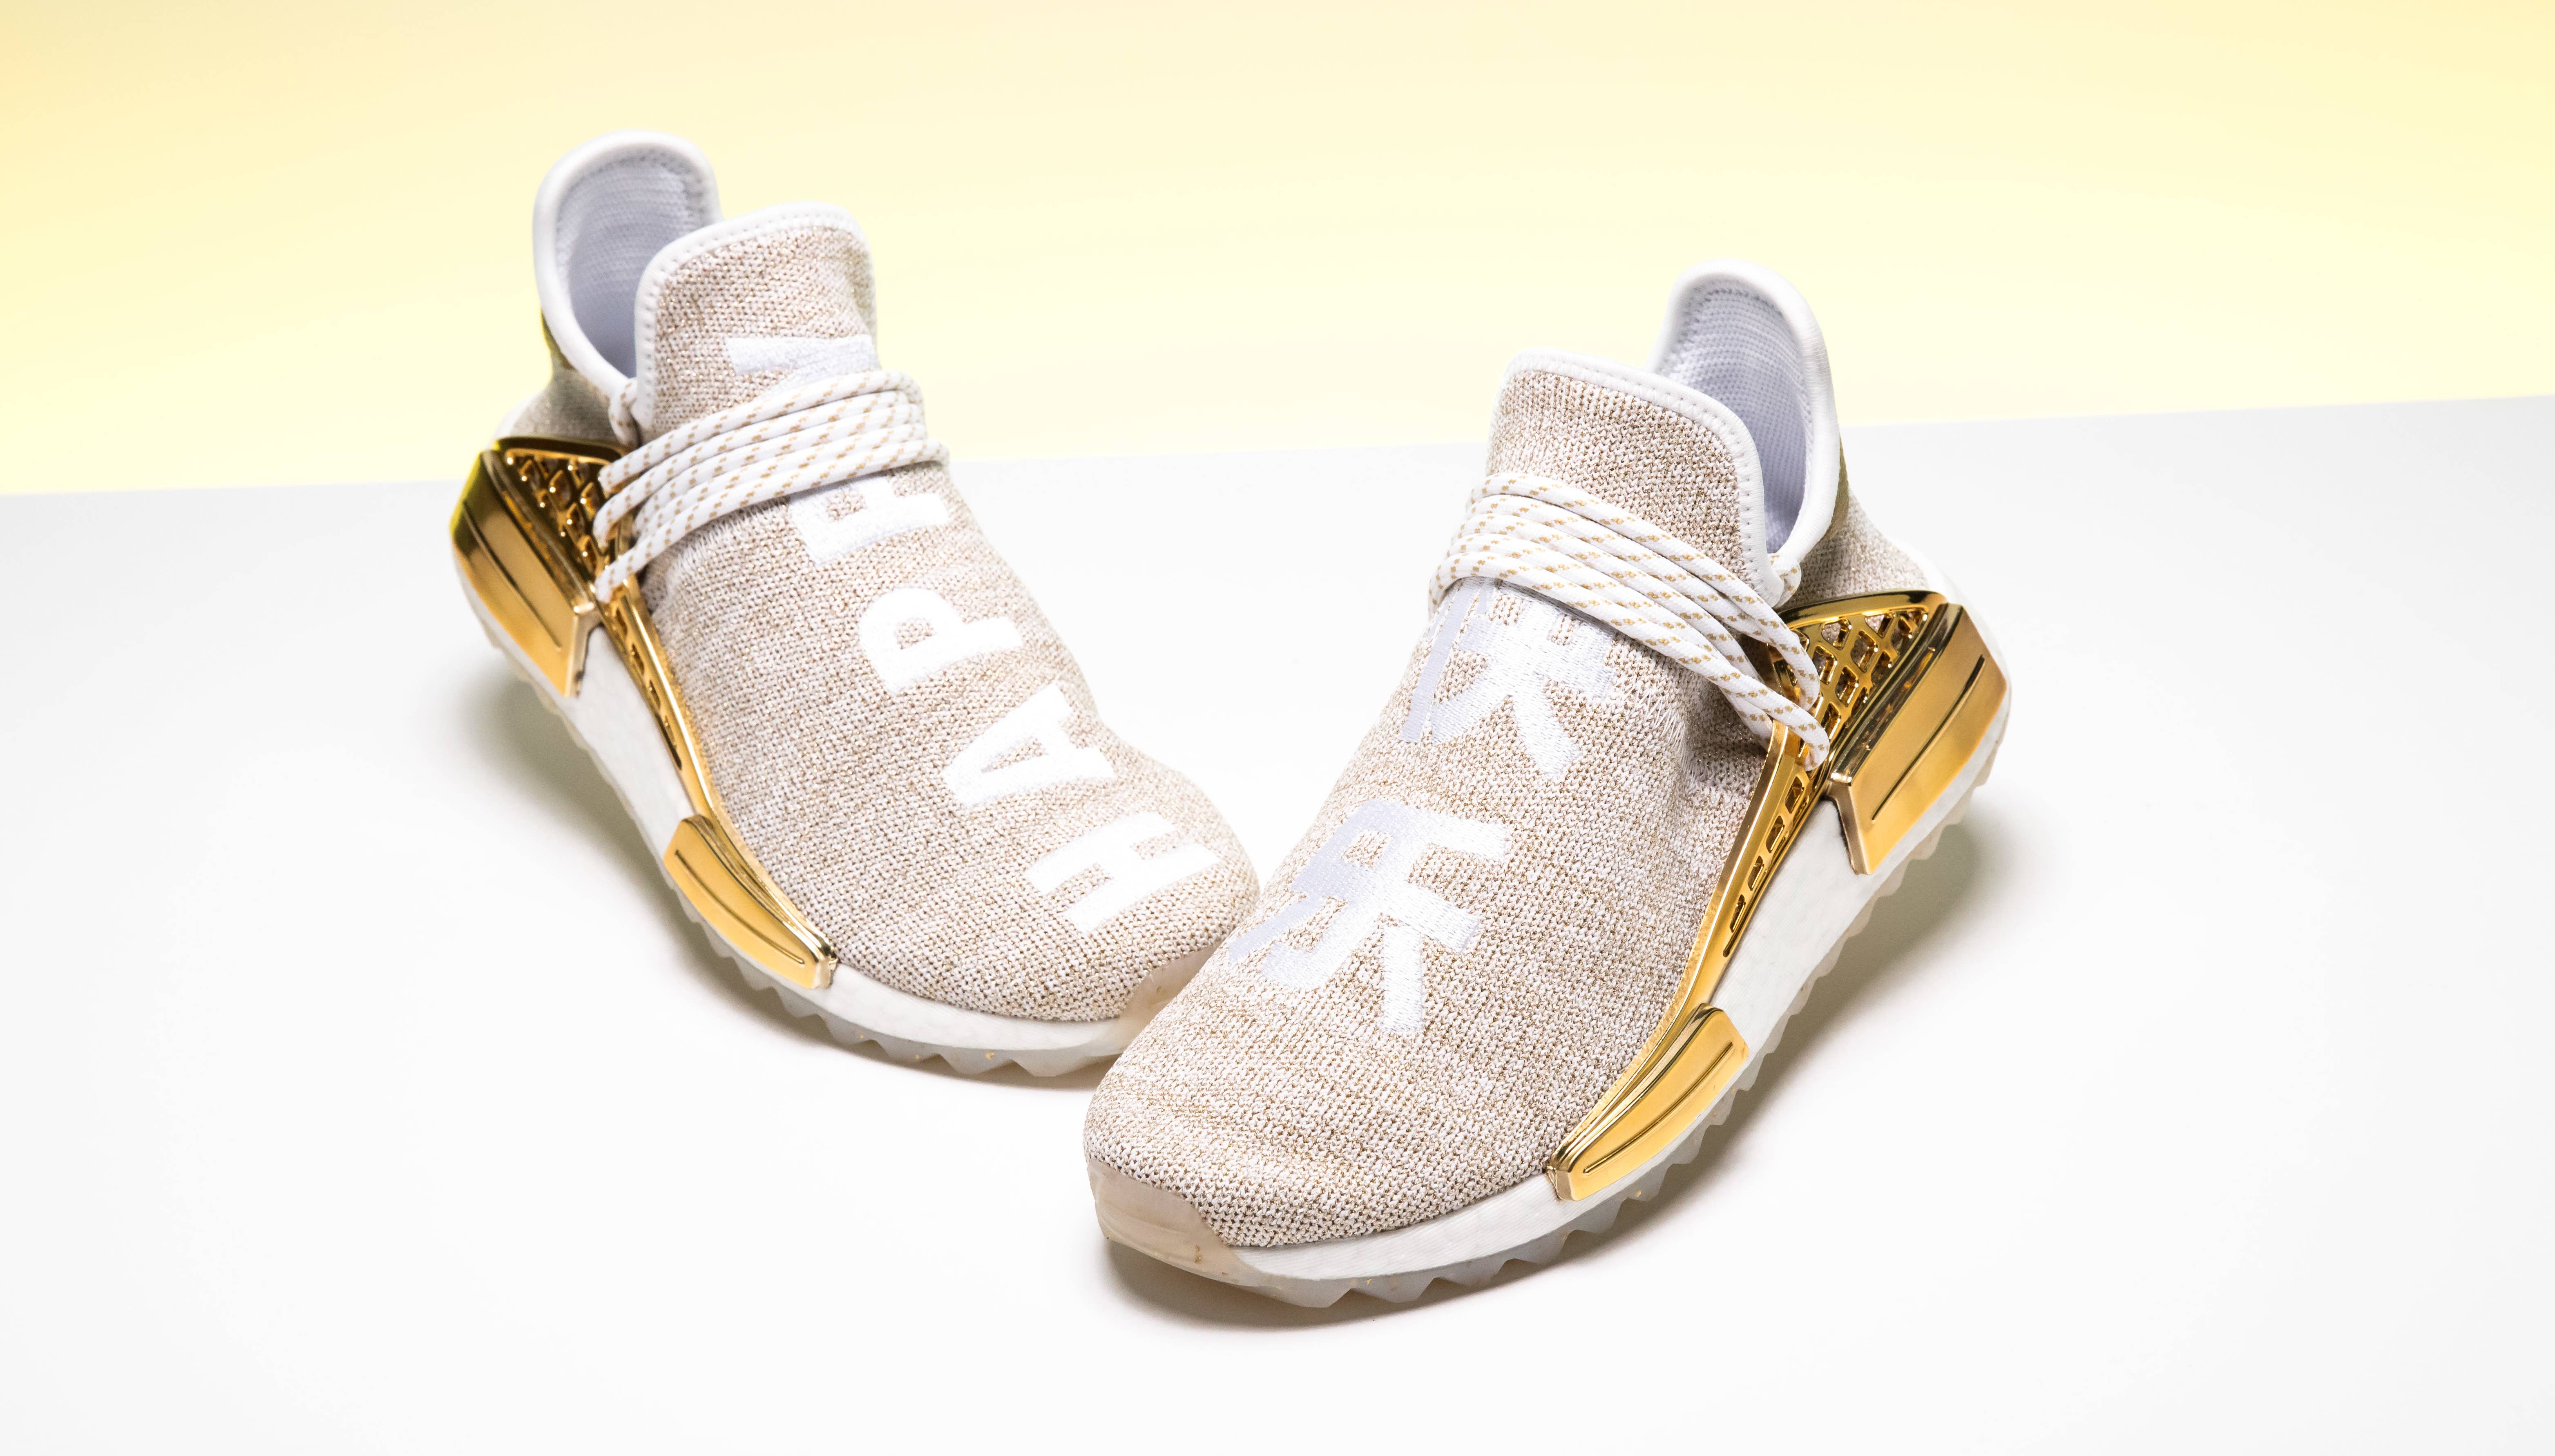 Pharrell Williams x Adidas NMD Hu China Exclusive 'Happy' Gold F99762 (Front Pair)